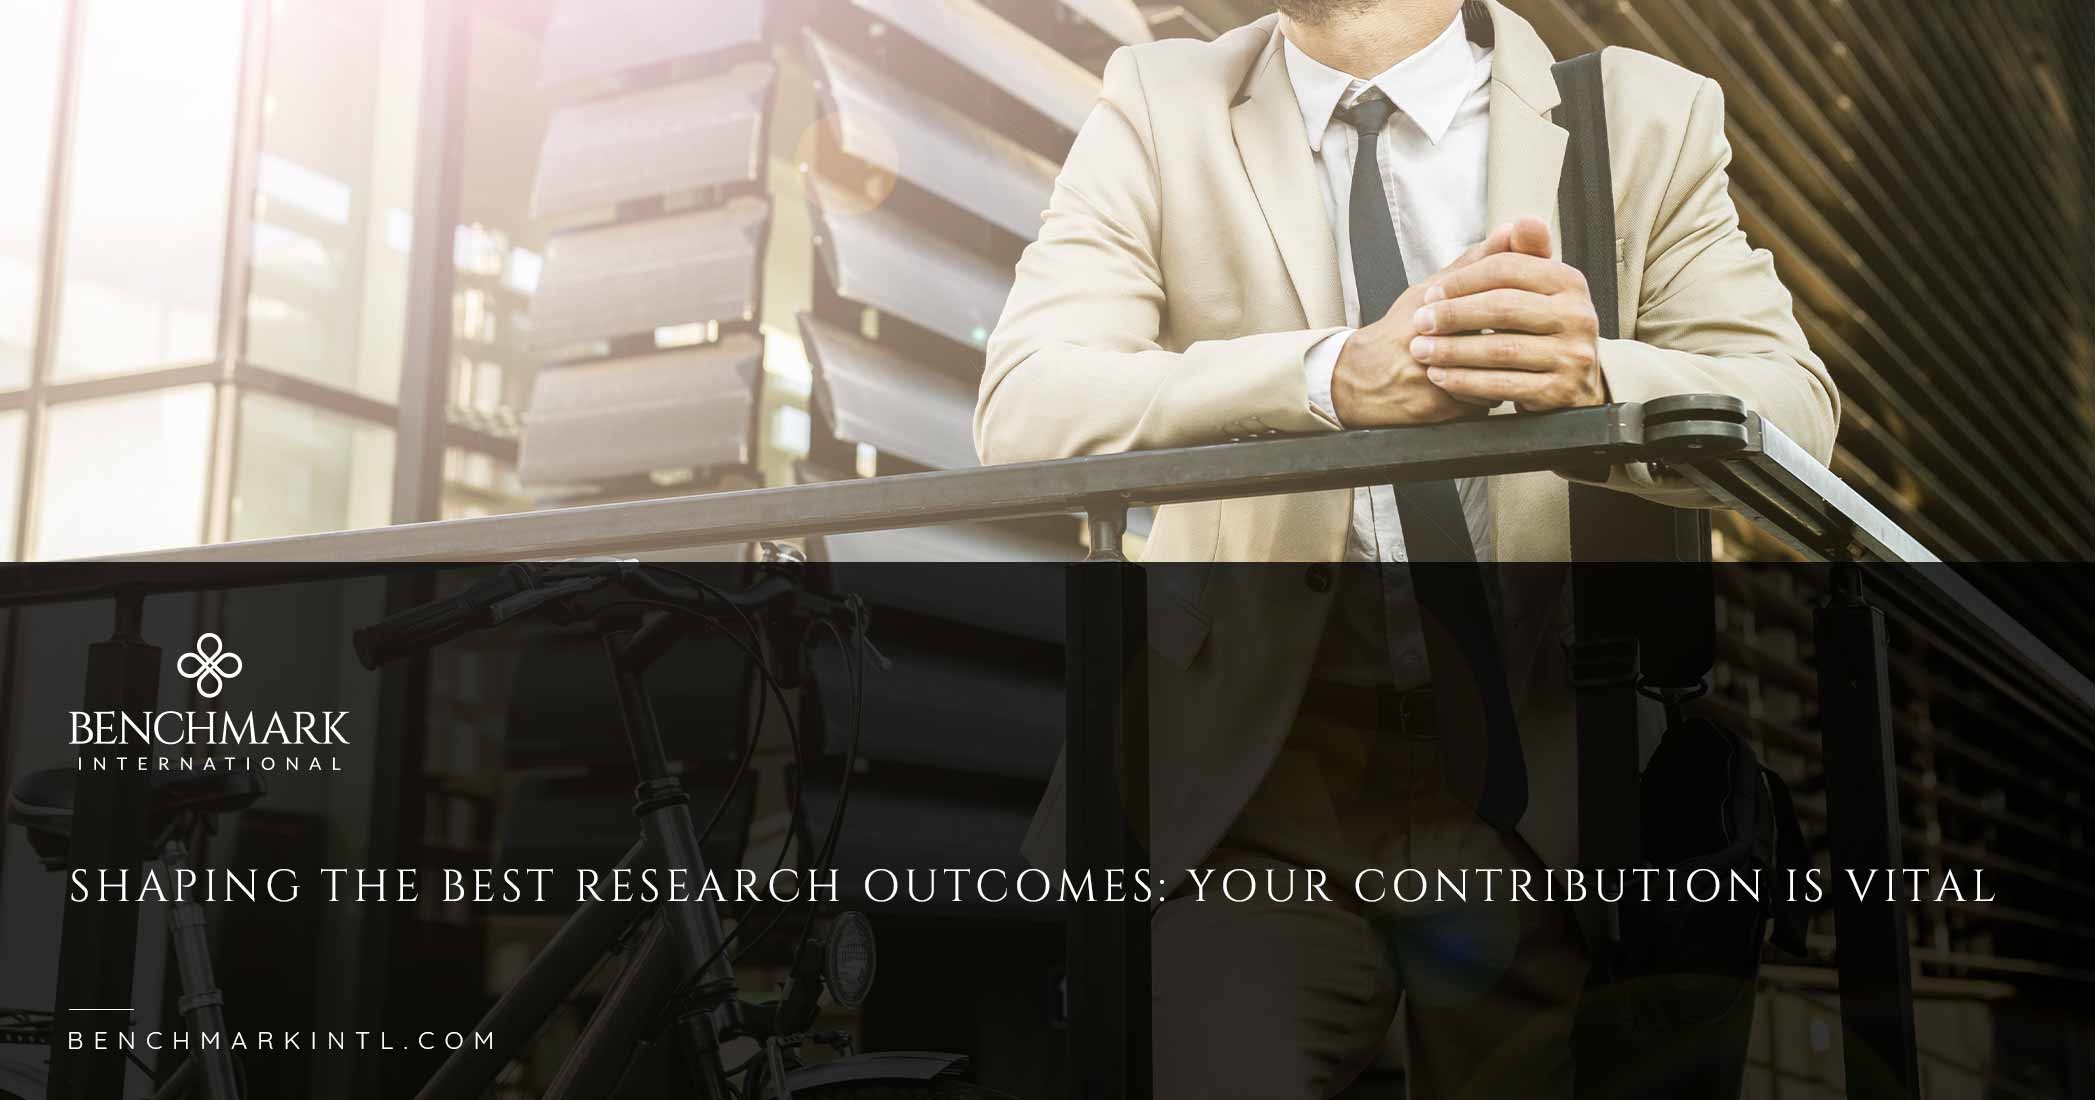 Shaping the Best Research Outcomes: Your Contribution is Vital